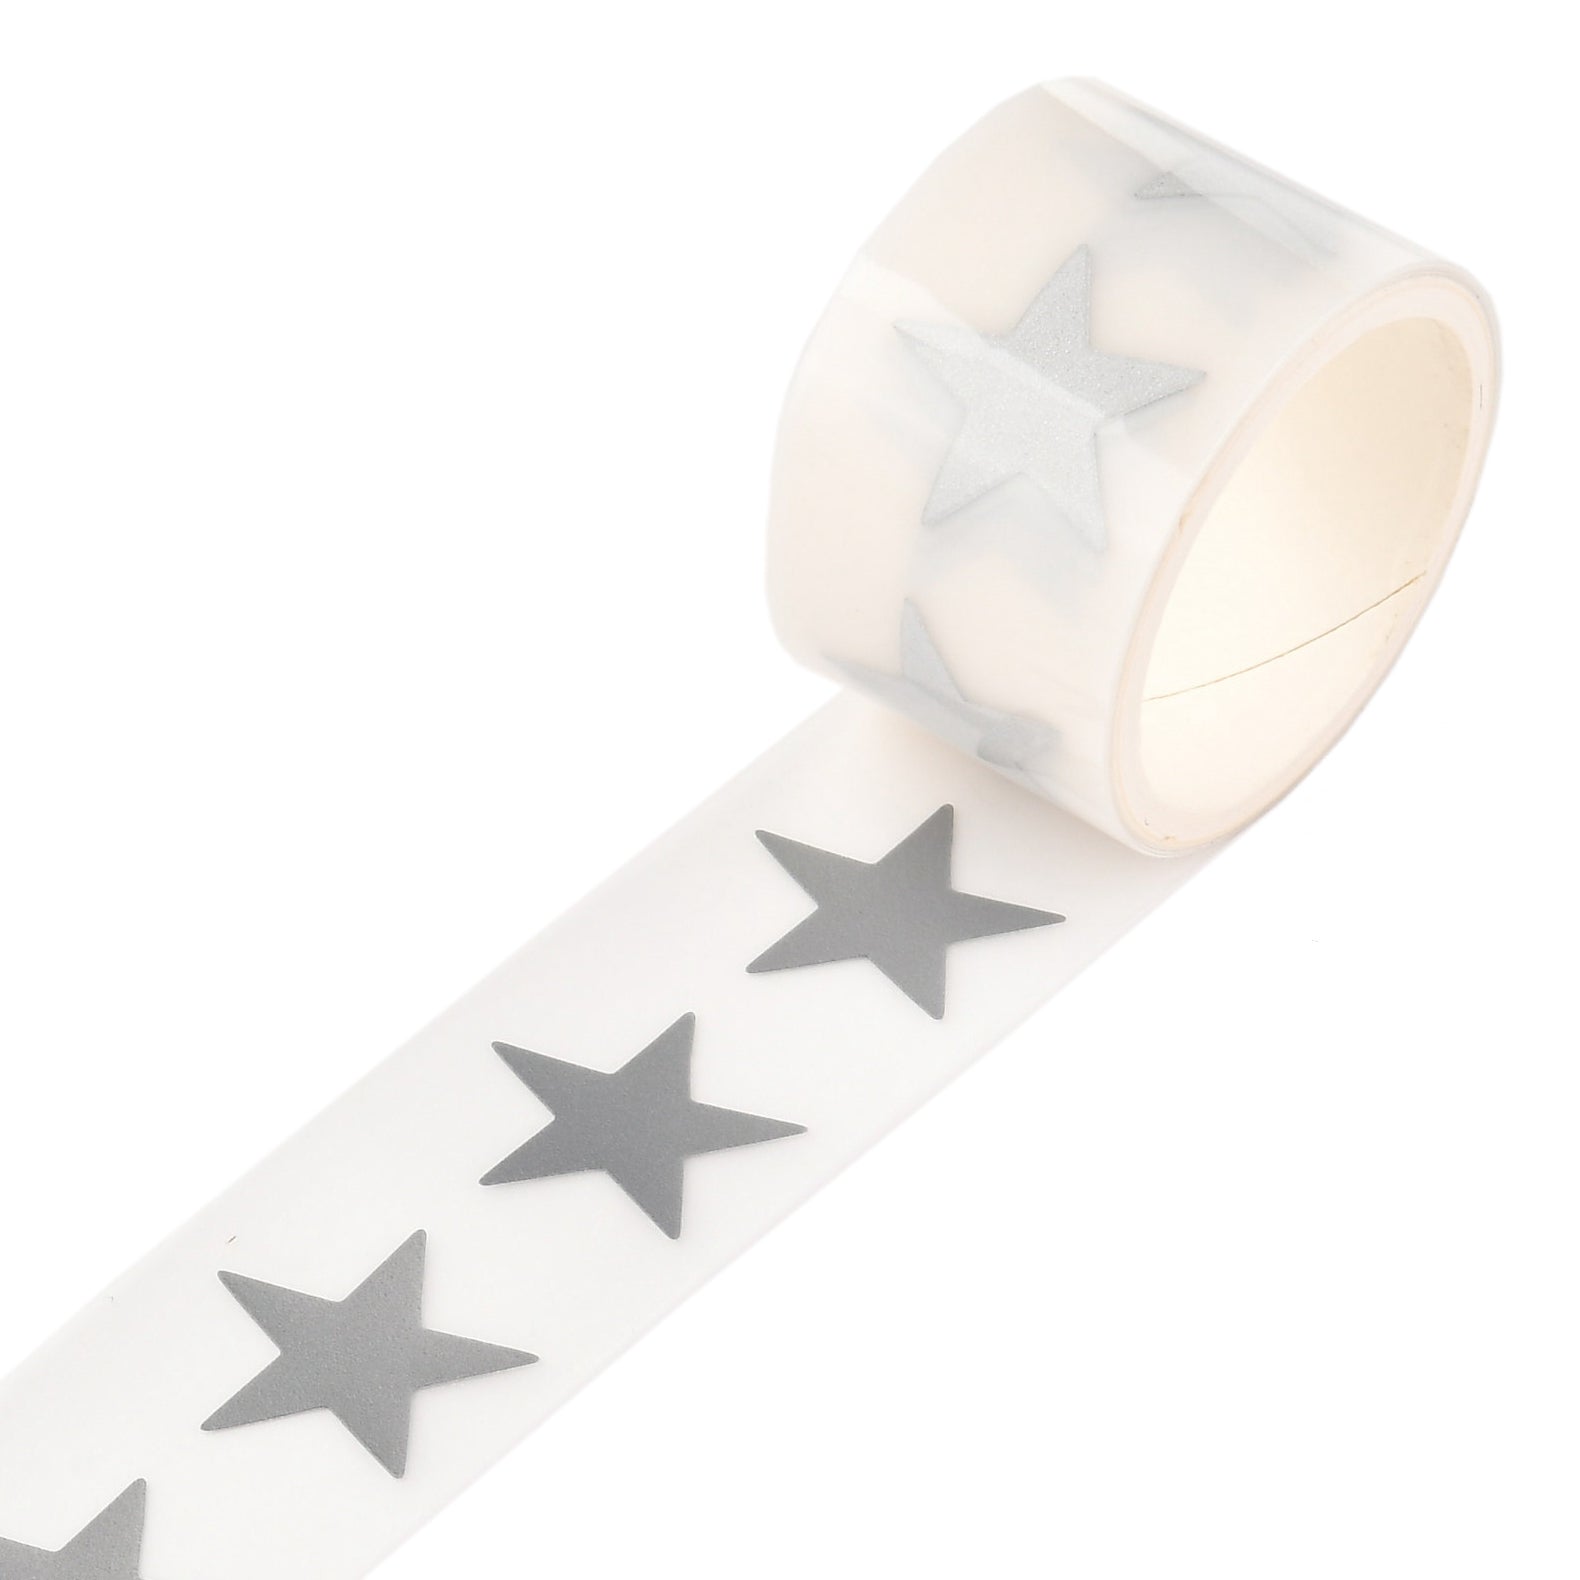 Craspire Silver Reflective Tape Stickers, Iron on Clothing Heat